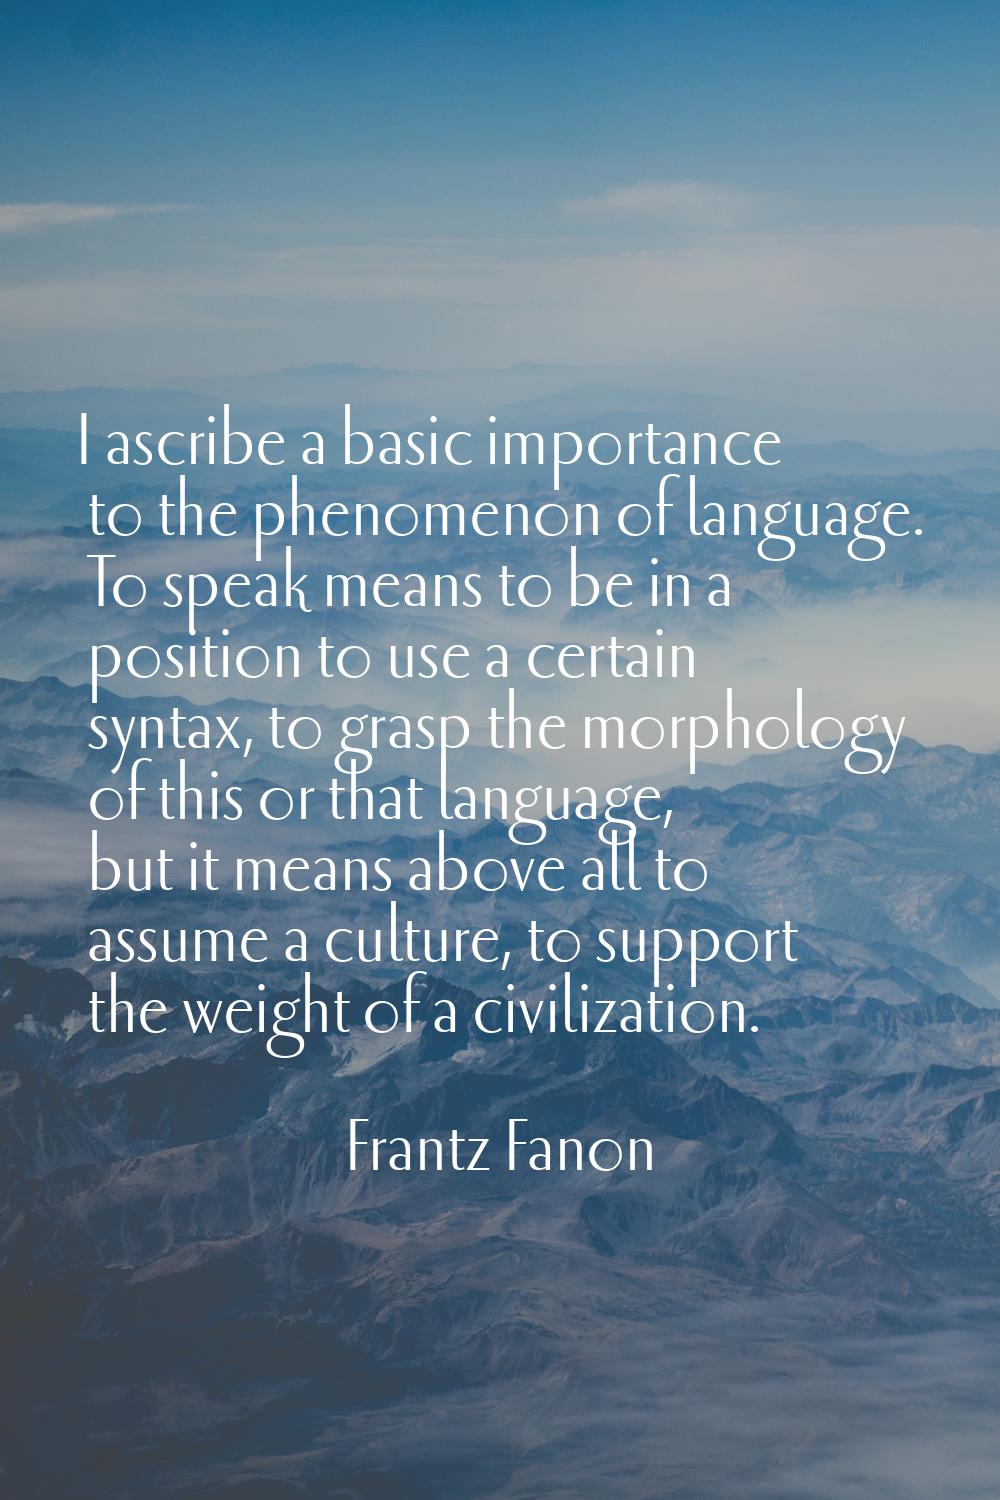 I ascribe a basic importance to the phenomenon of language. To speak means to be in a position to u